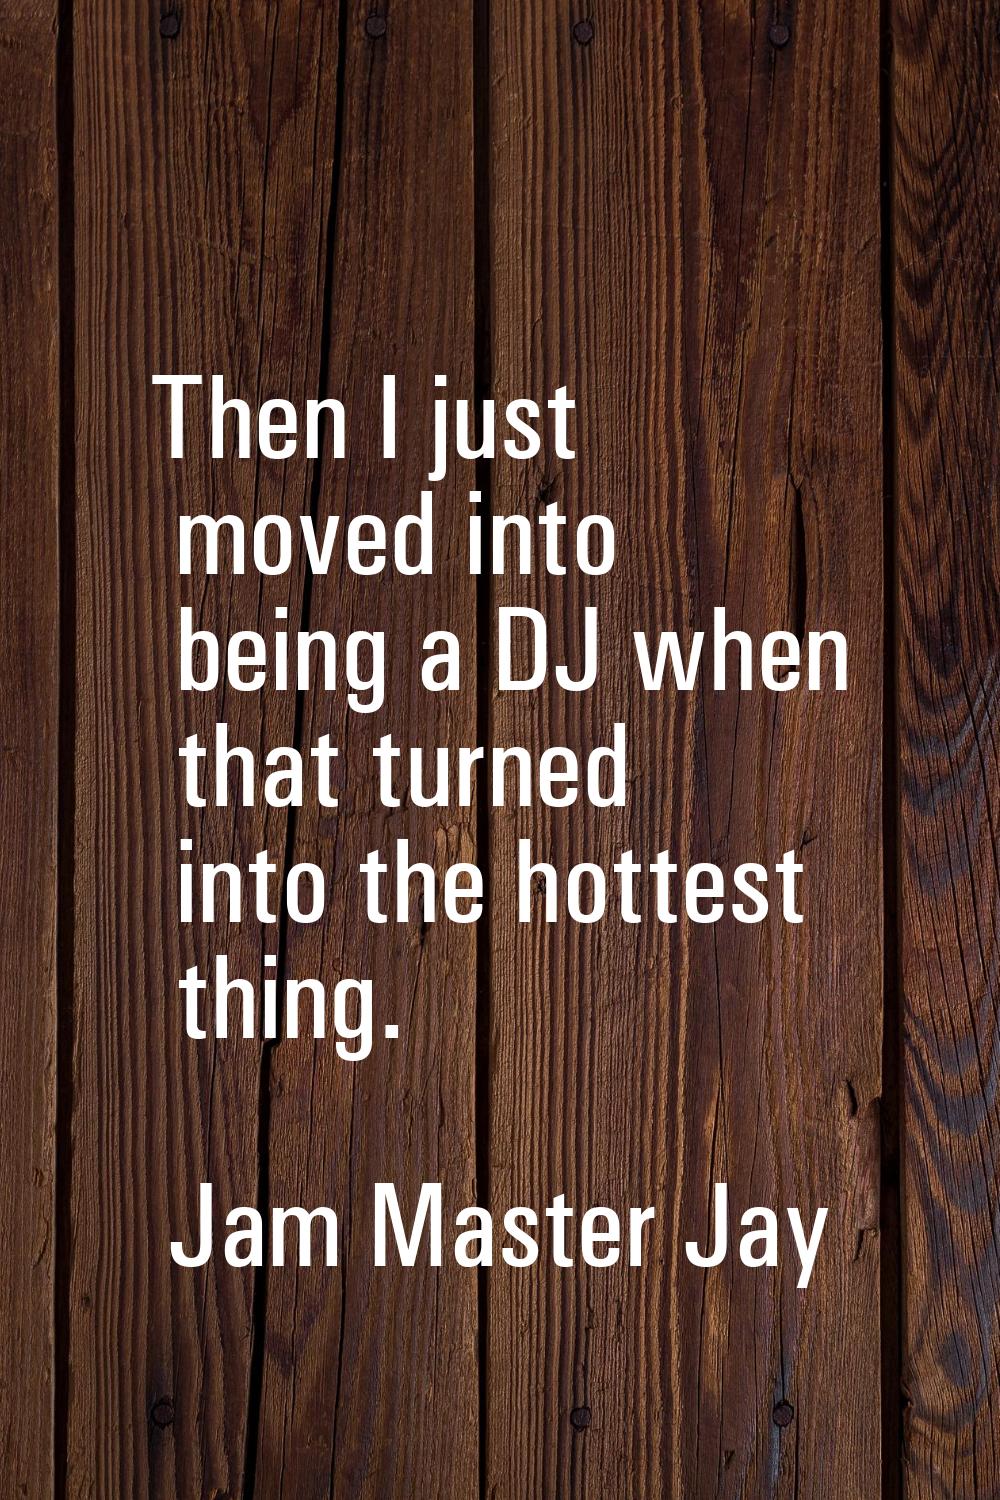 Then I just moved into being a DJ when that turned into the hottest thing.